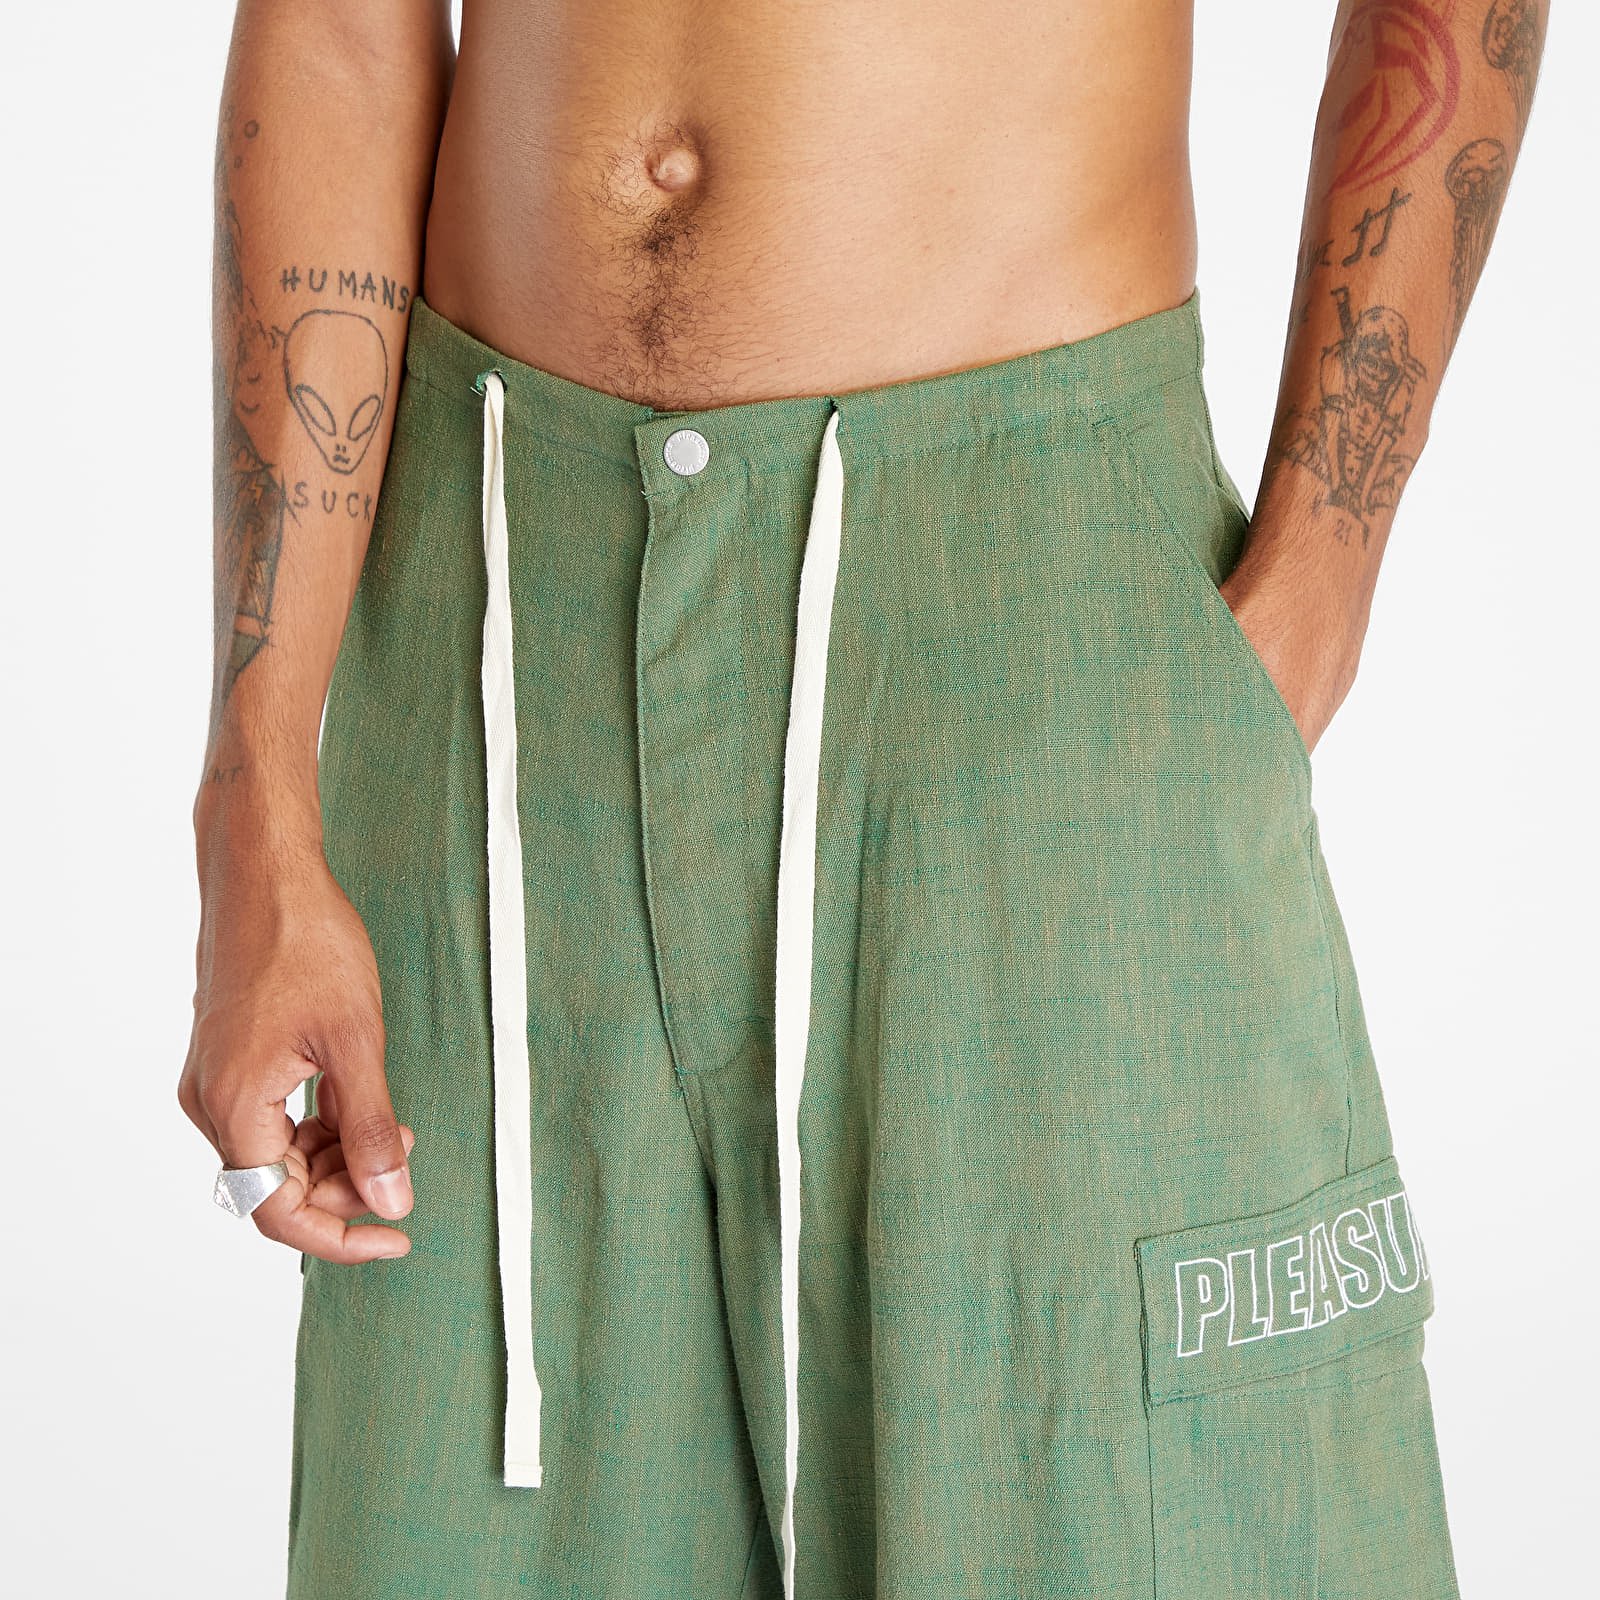 Cargo pants Pleasures Visitor Wide Fit Cargo Pants Green P23F012 GREEN